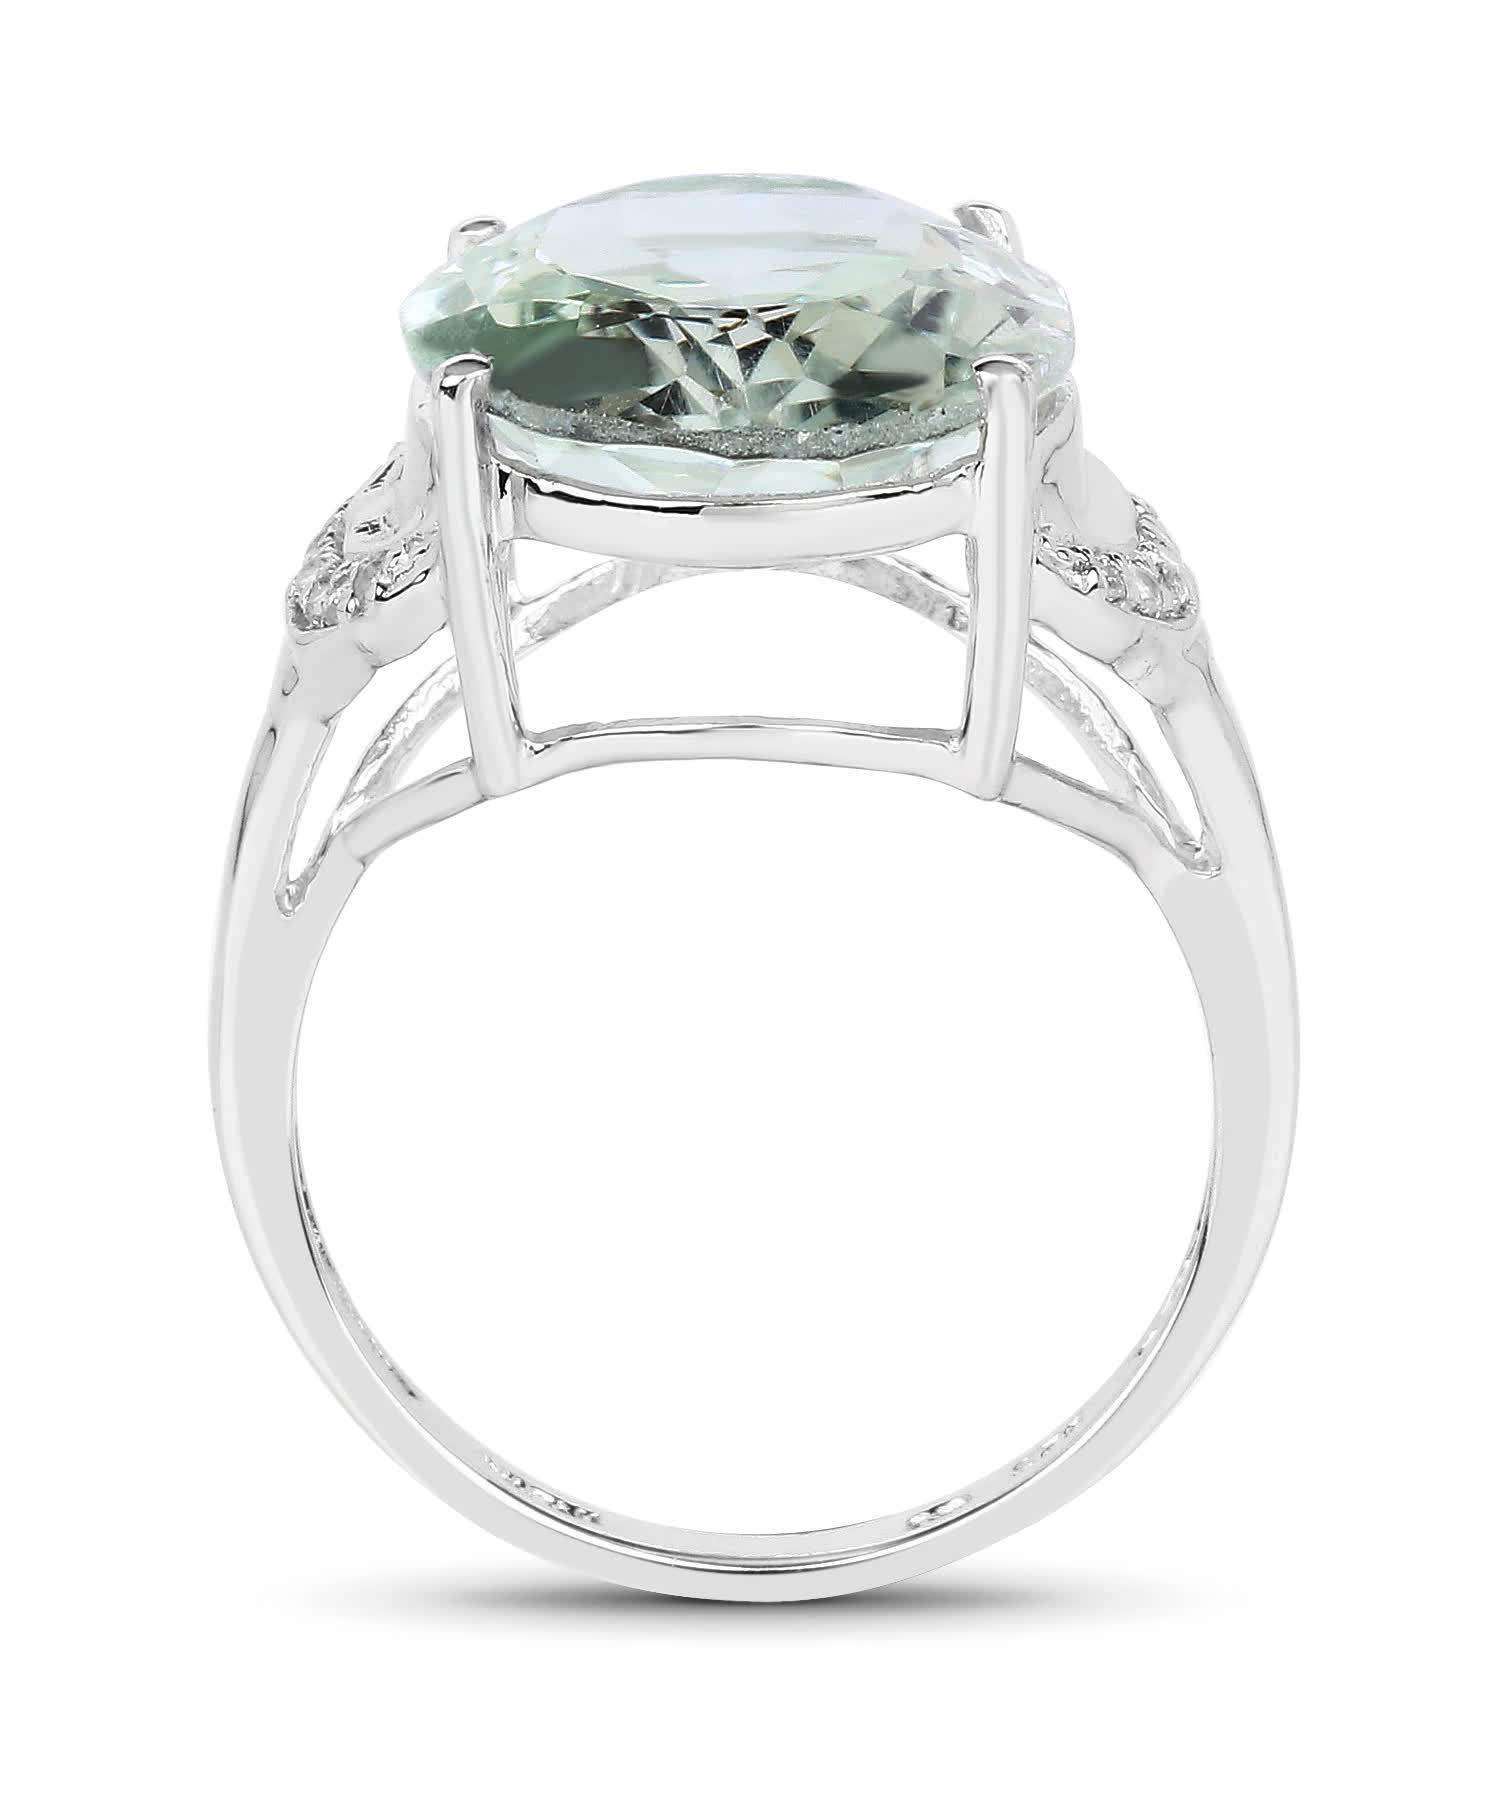 7.98ctw Natural Green Amethyst and Topaz Rhodium Plated 925 Sterling Silver Cocktail Ring View 2